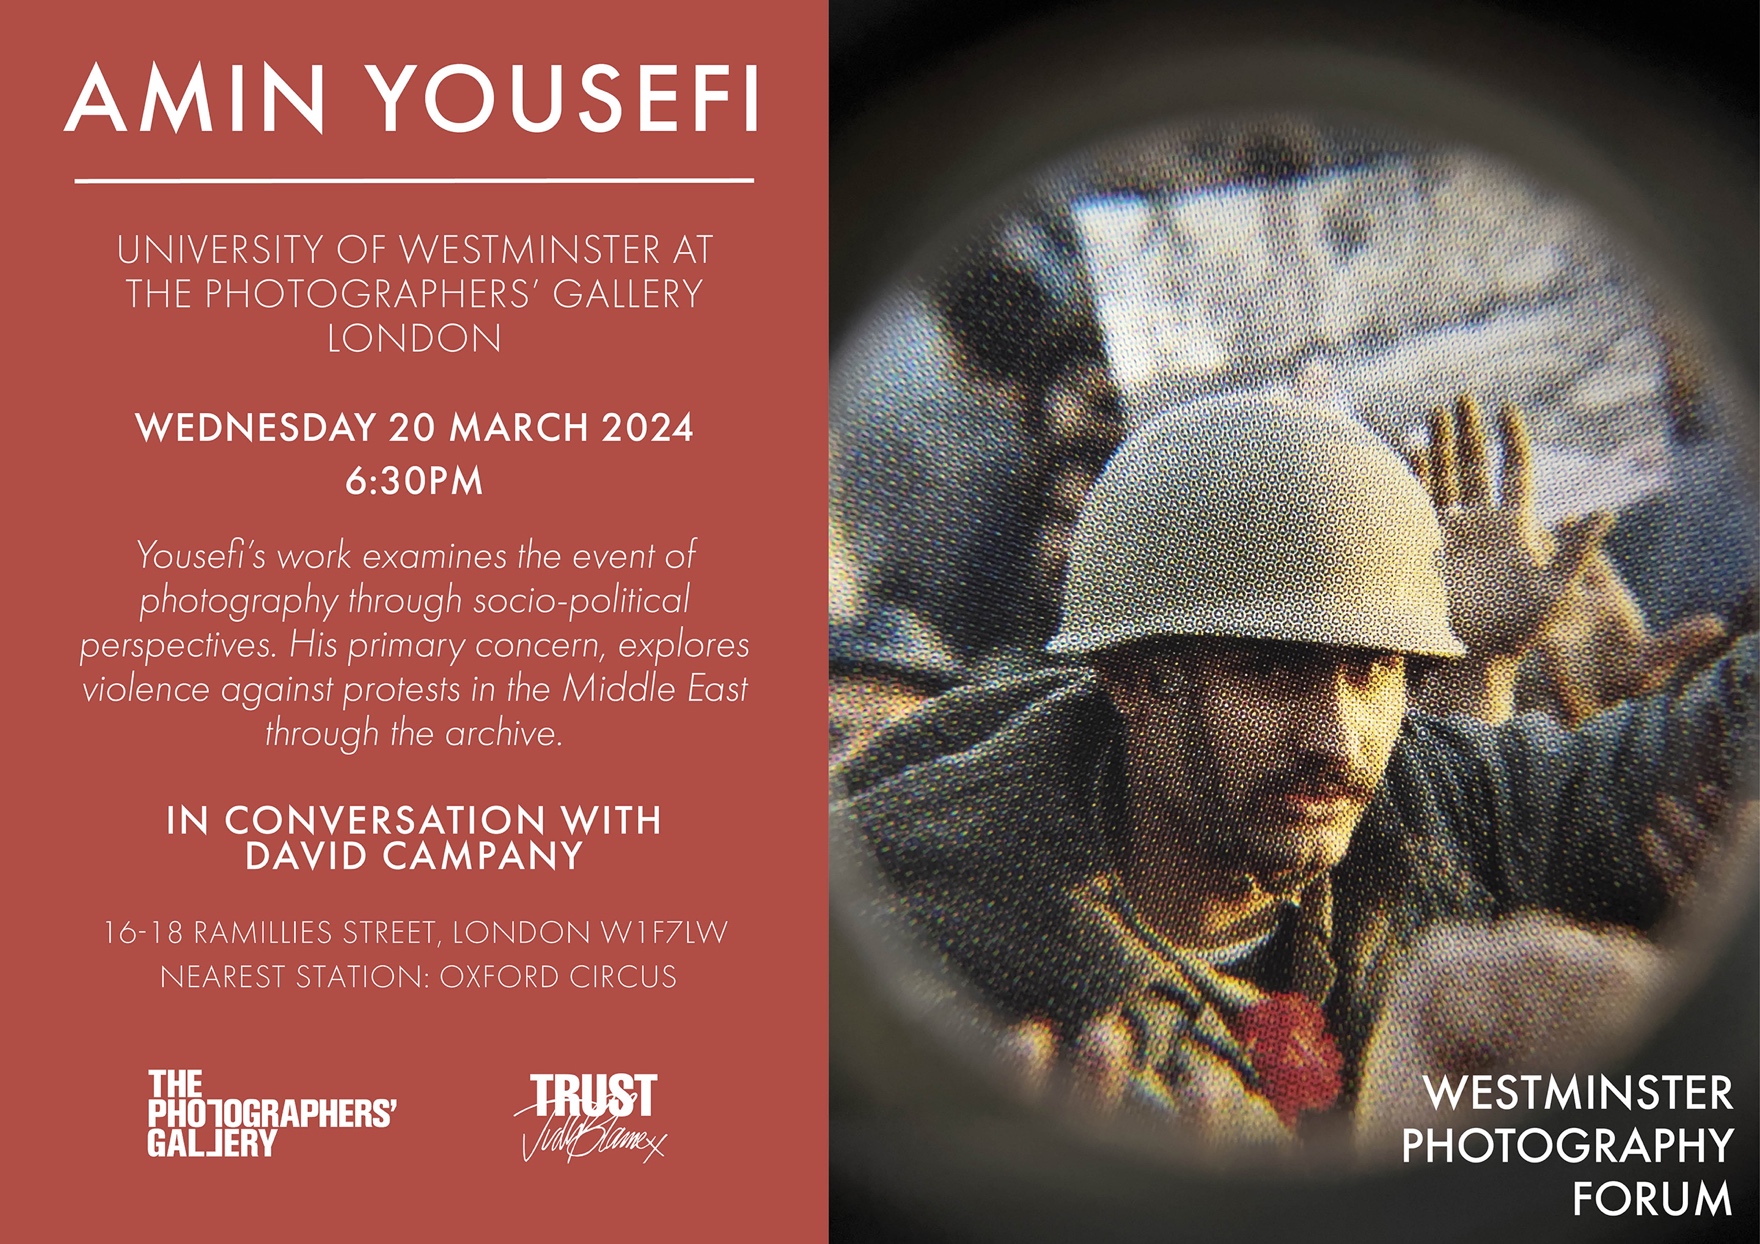 poster for Amin Yousefi talk on Wednesday 20 March 2024, 6:30pm - 7:45pm at the Photographers' Gallery London